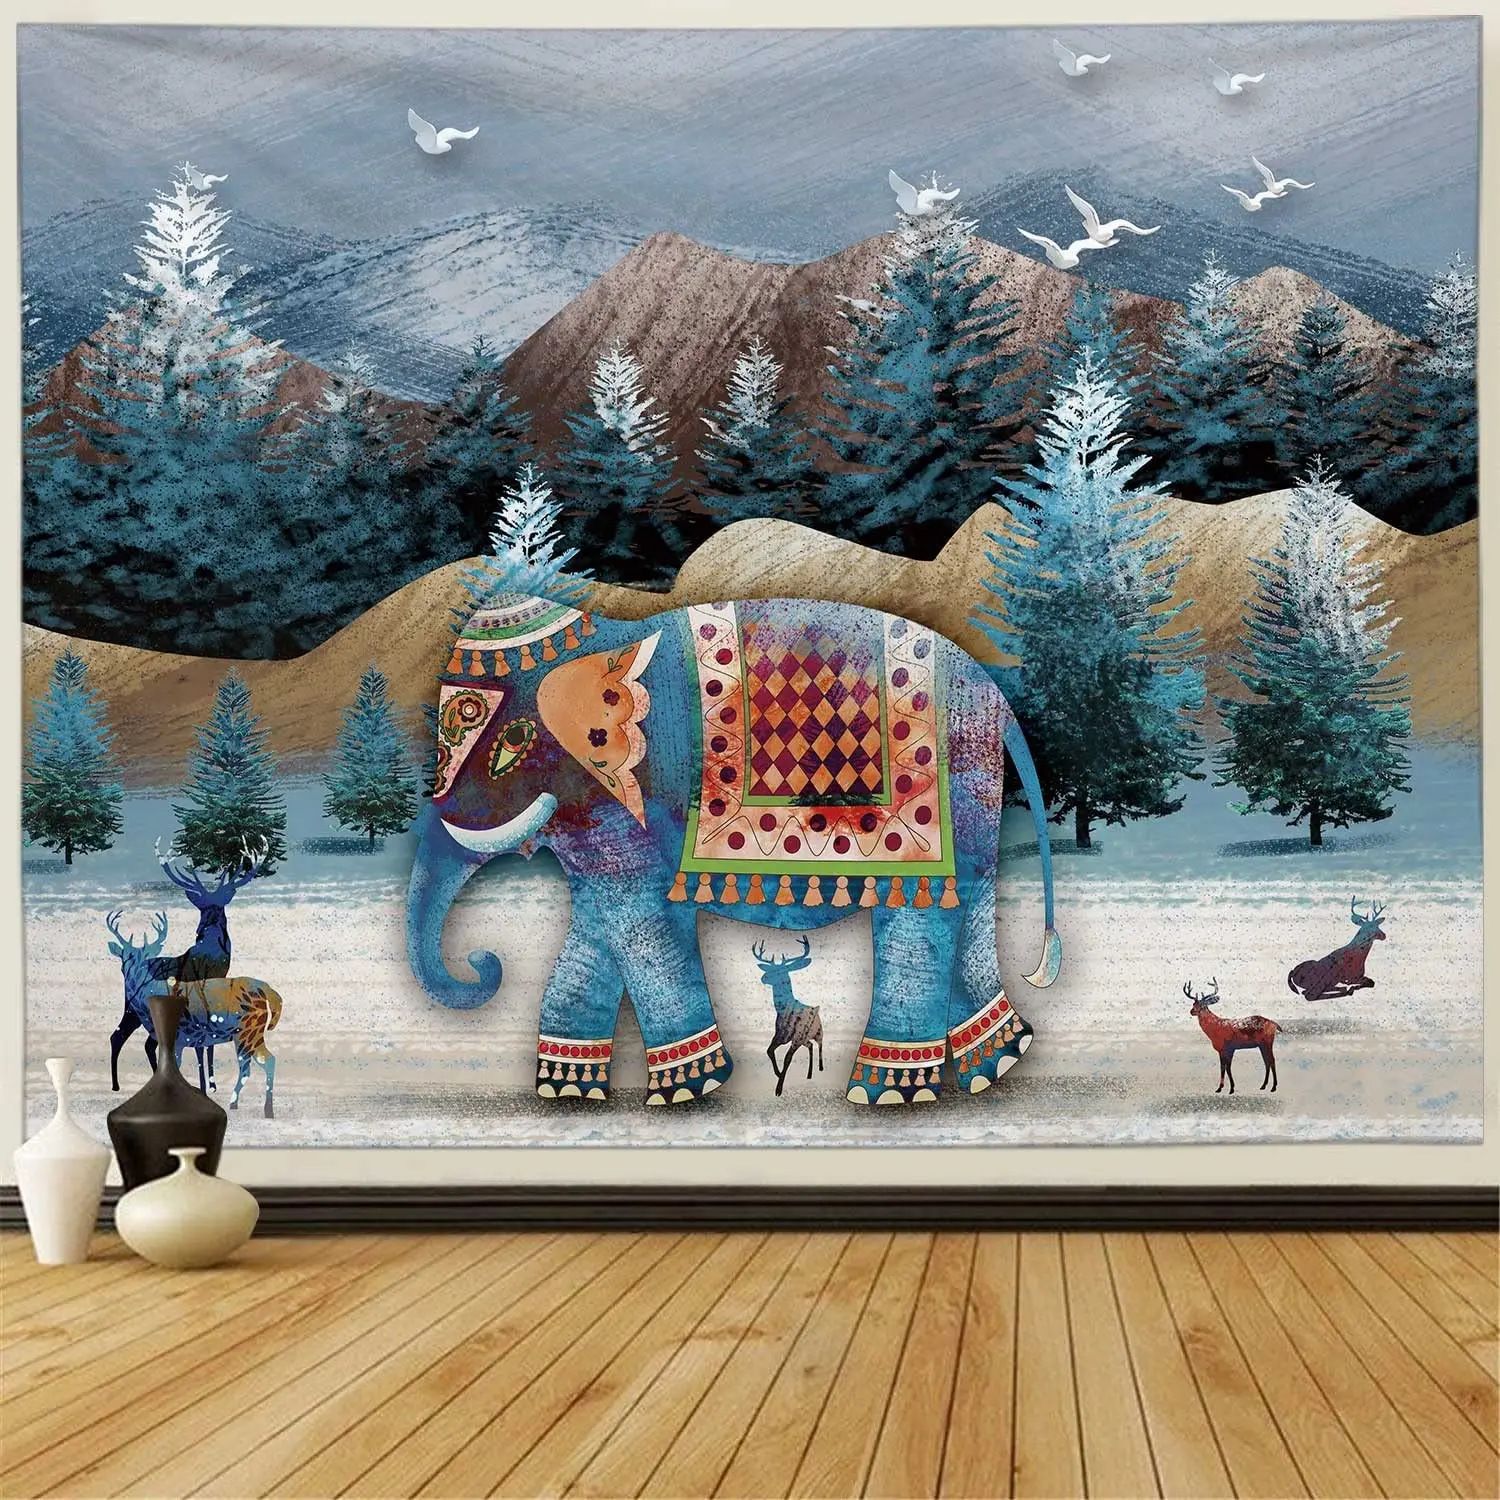 

Elephant Forest Tapestry, Retro Trippy Hippie Boho Indie Aesthetic Wall Tapestry Bedroom Living Room Dorm Wall Hanging